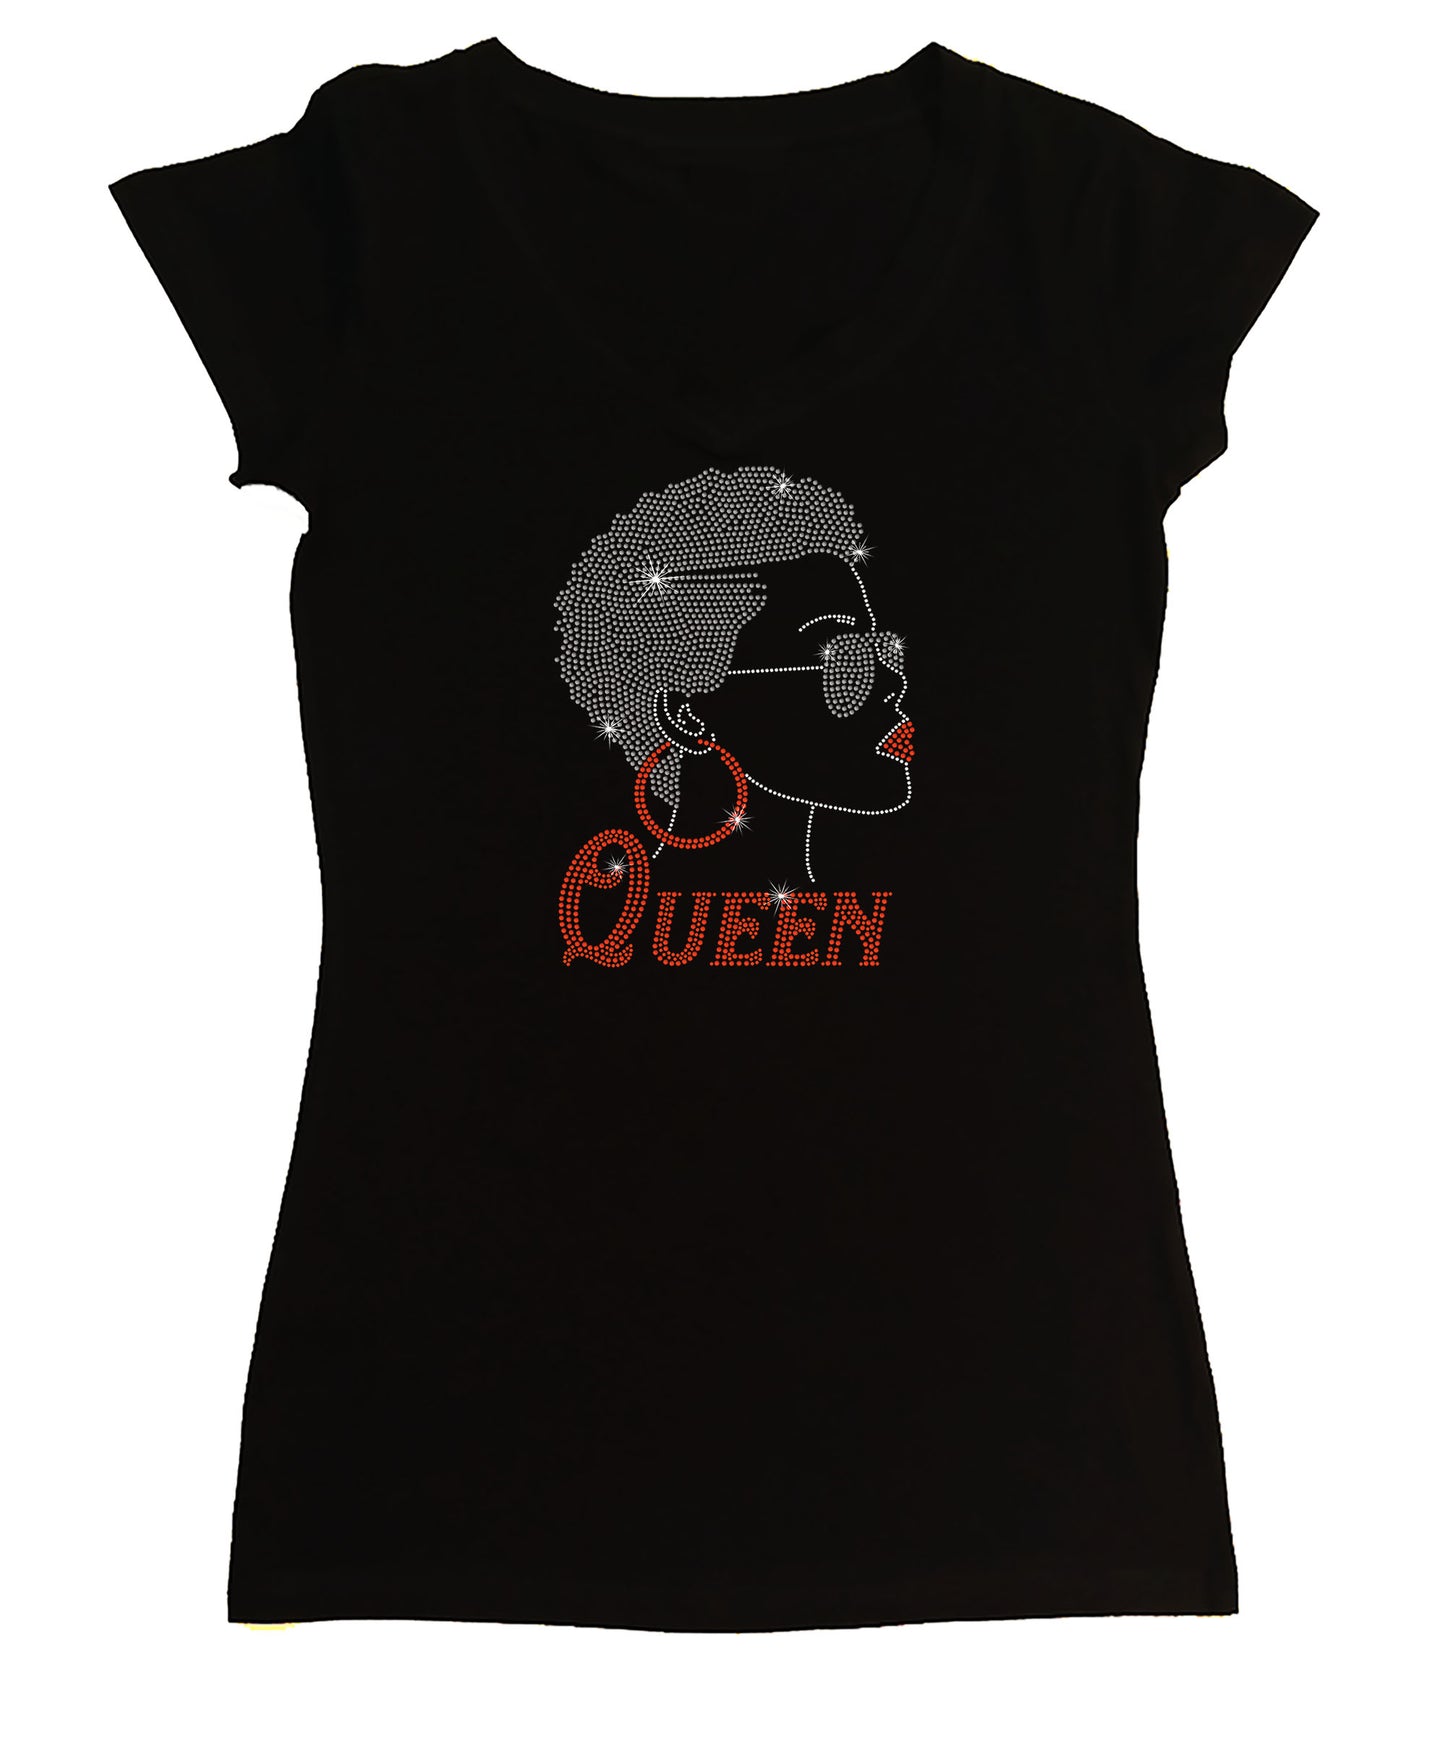 Women's Rhinestone Fitted Tight Snug Shirt Afro Girl with Short Hair and Glasses - Hoop Earrings, Queen